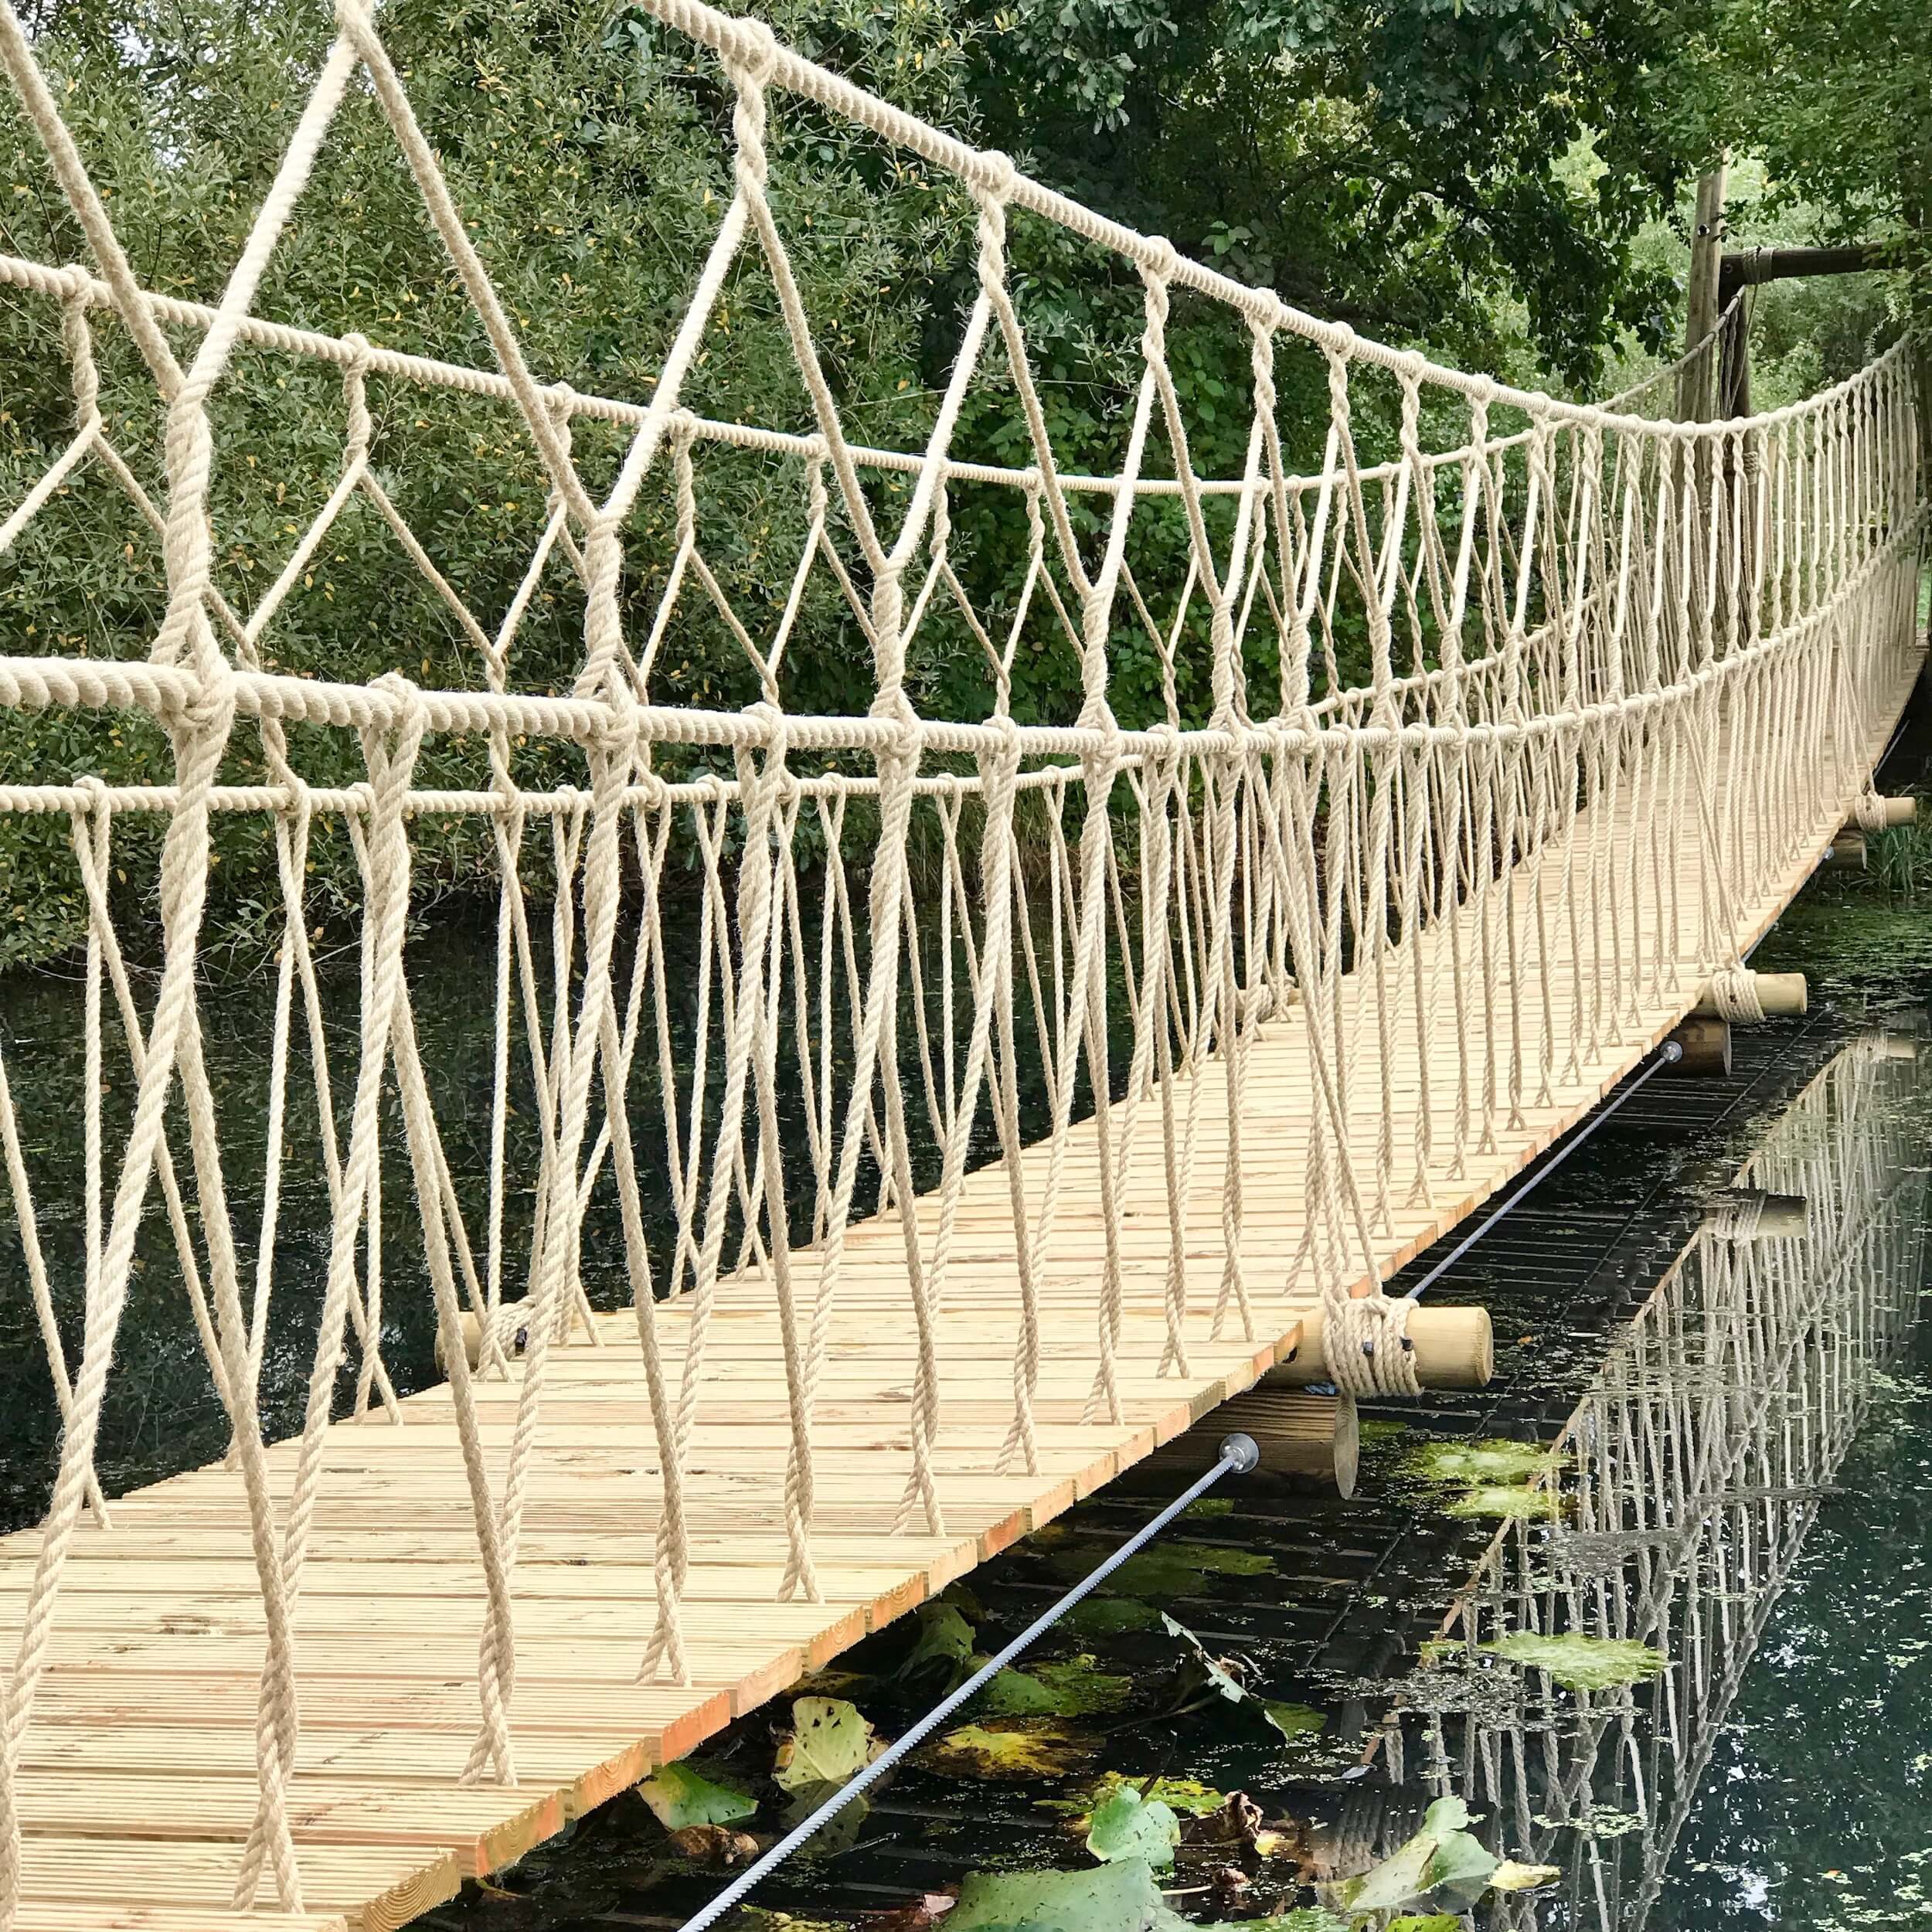 WWT London Wetlands Centre visitor attraction — Rope Bridge